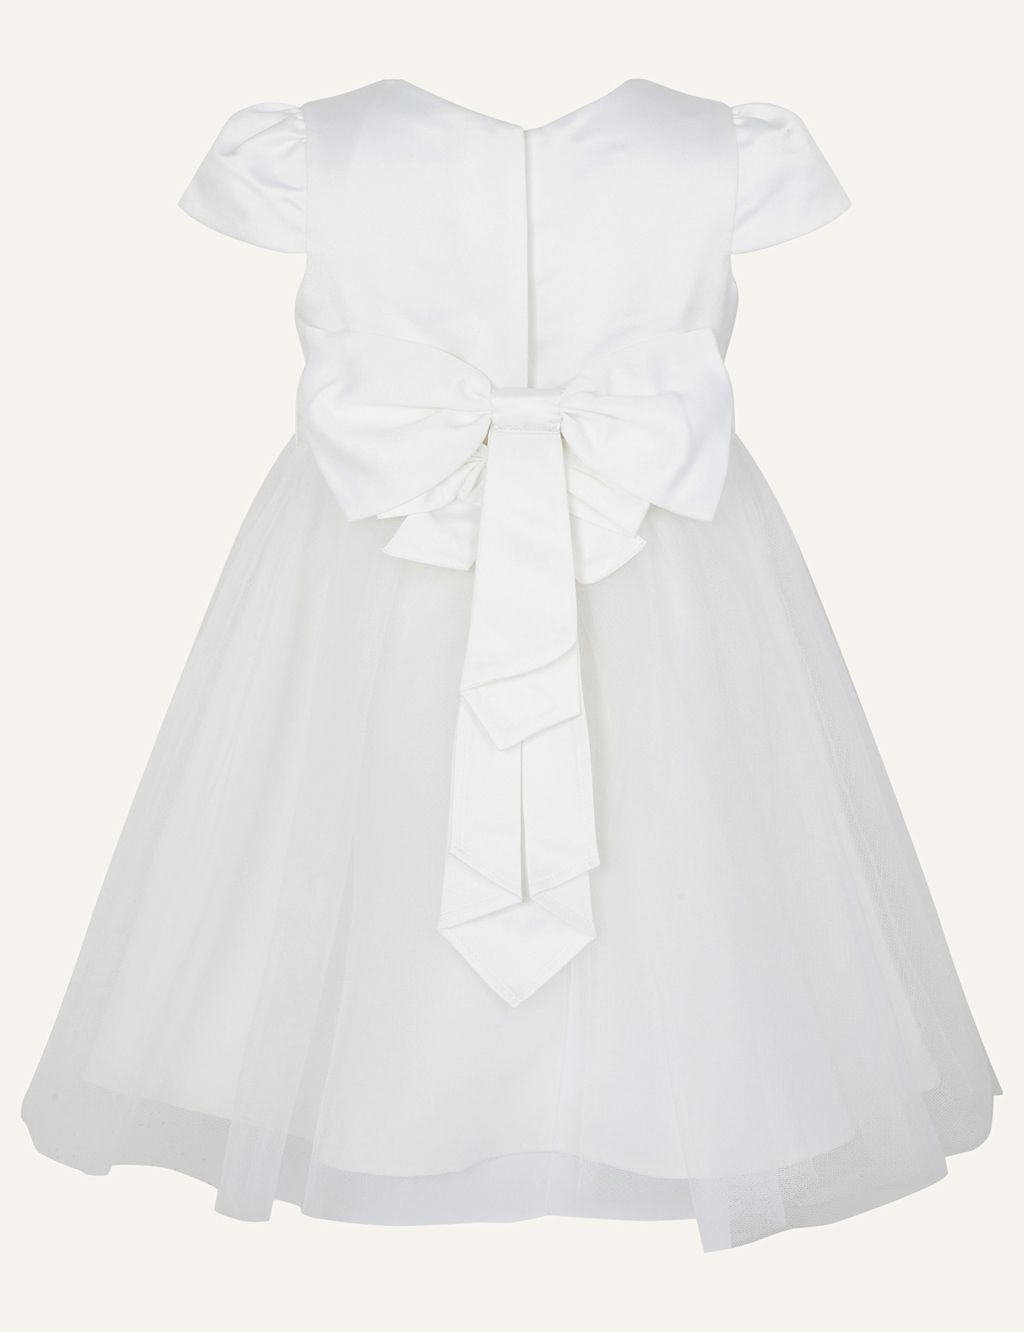 Tulle Occasion Dress (0-3 Yrs) image 2